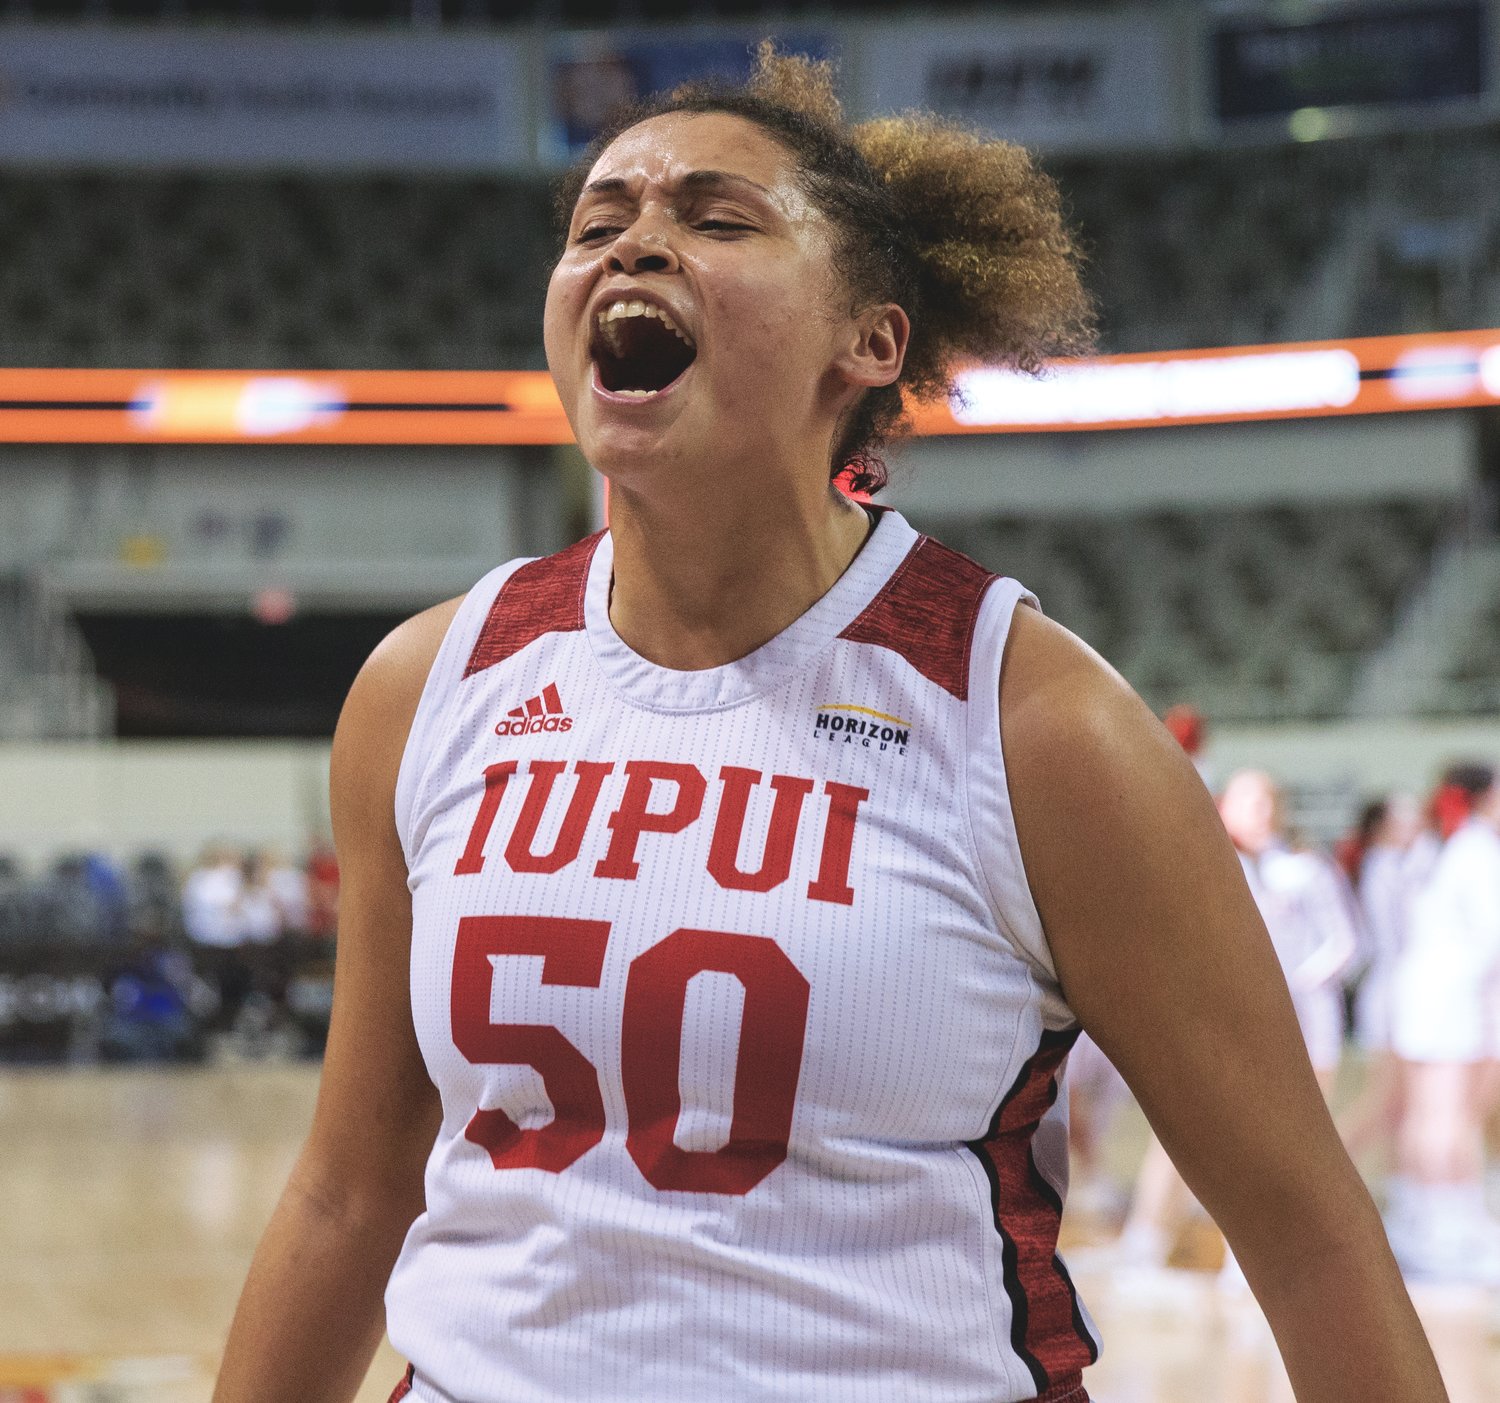 Macee Williams celebrates after a big moment in IUPUI's semifinal win over Cleveland State in the Horizon League tourney.